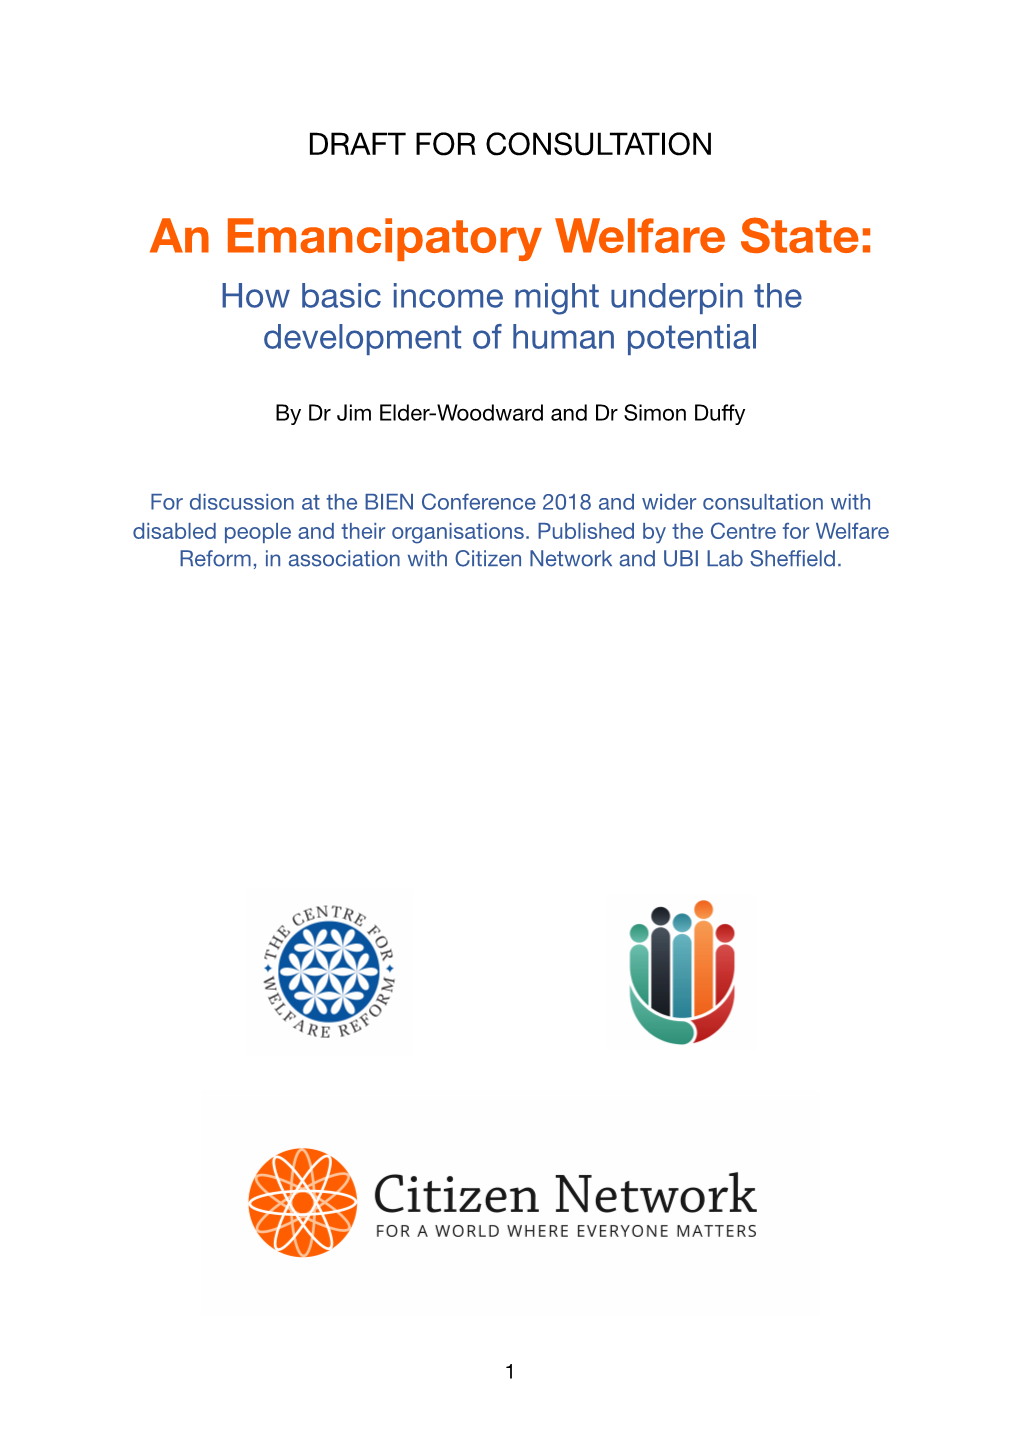 An Emancipatory Welfare State: How Basic Income Might Underpin the Development of Human Potential